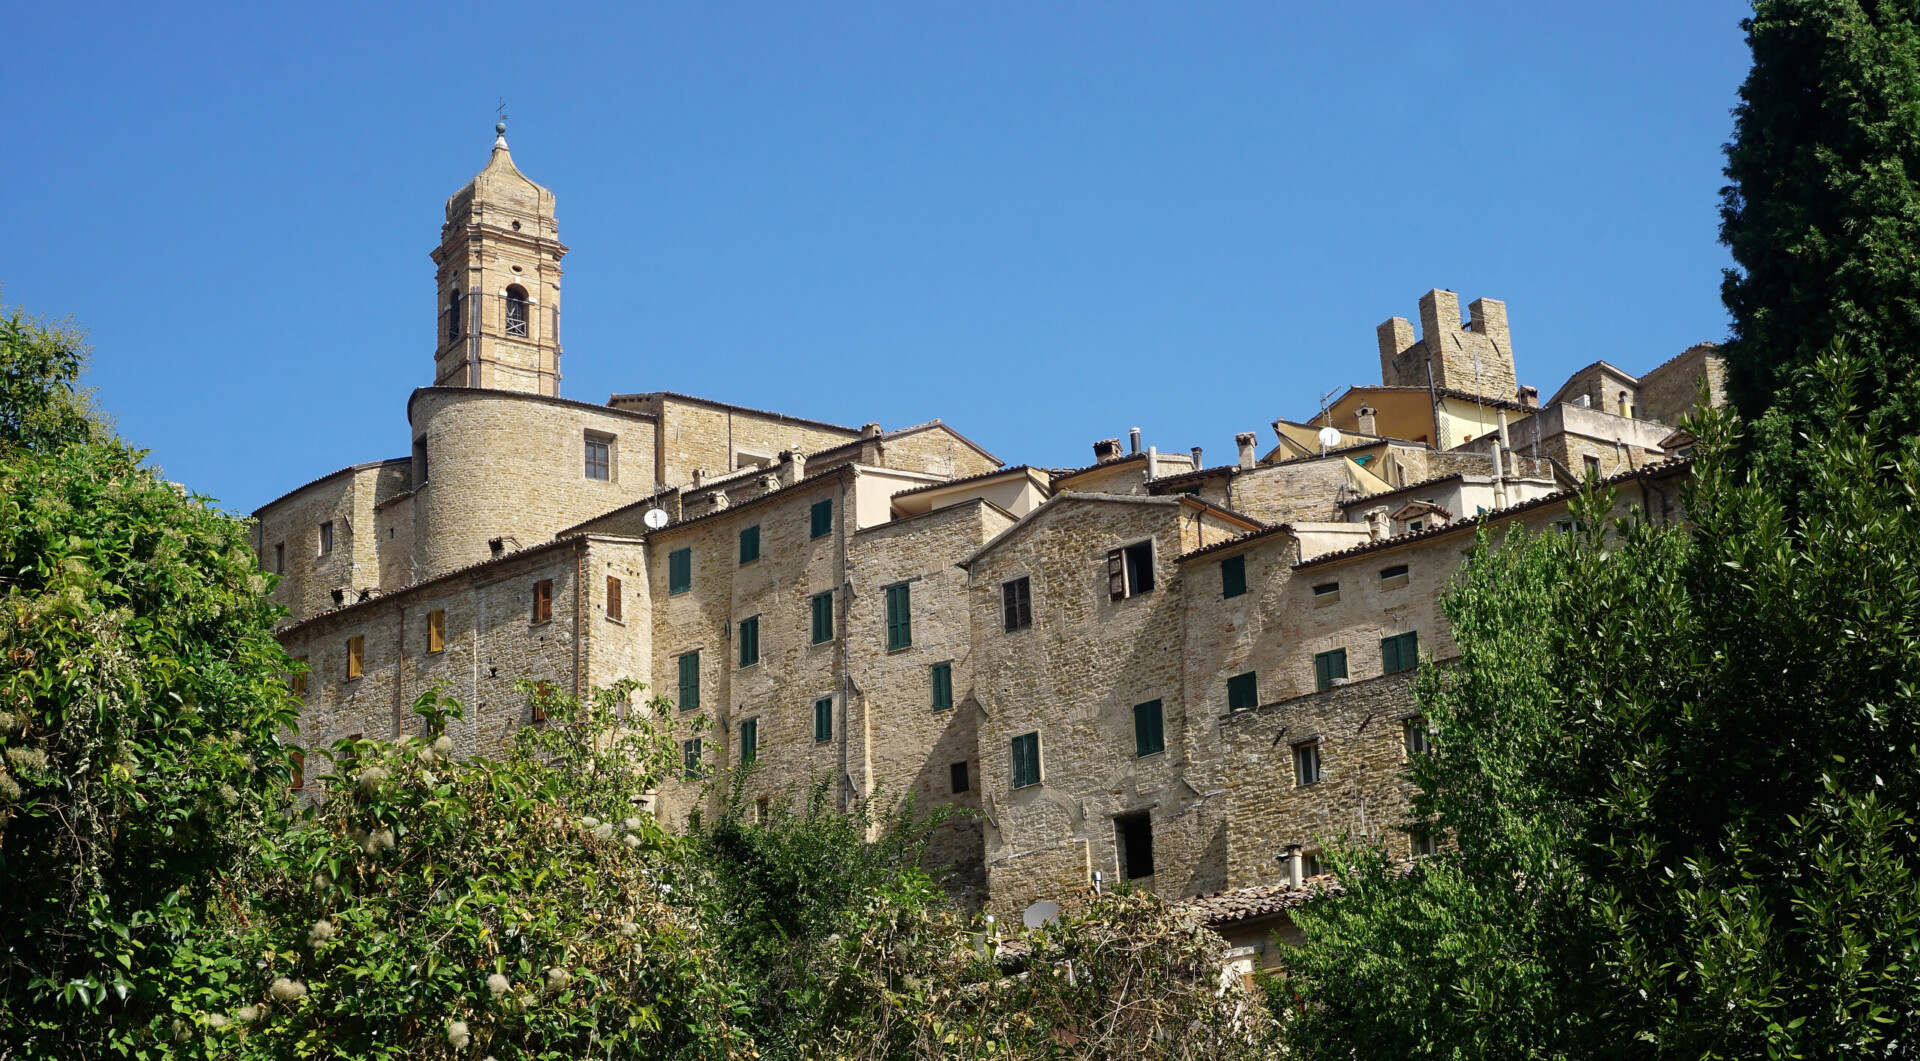 Views of the little town of Serra san Quirico in the Marche region of Italy